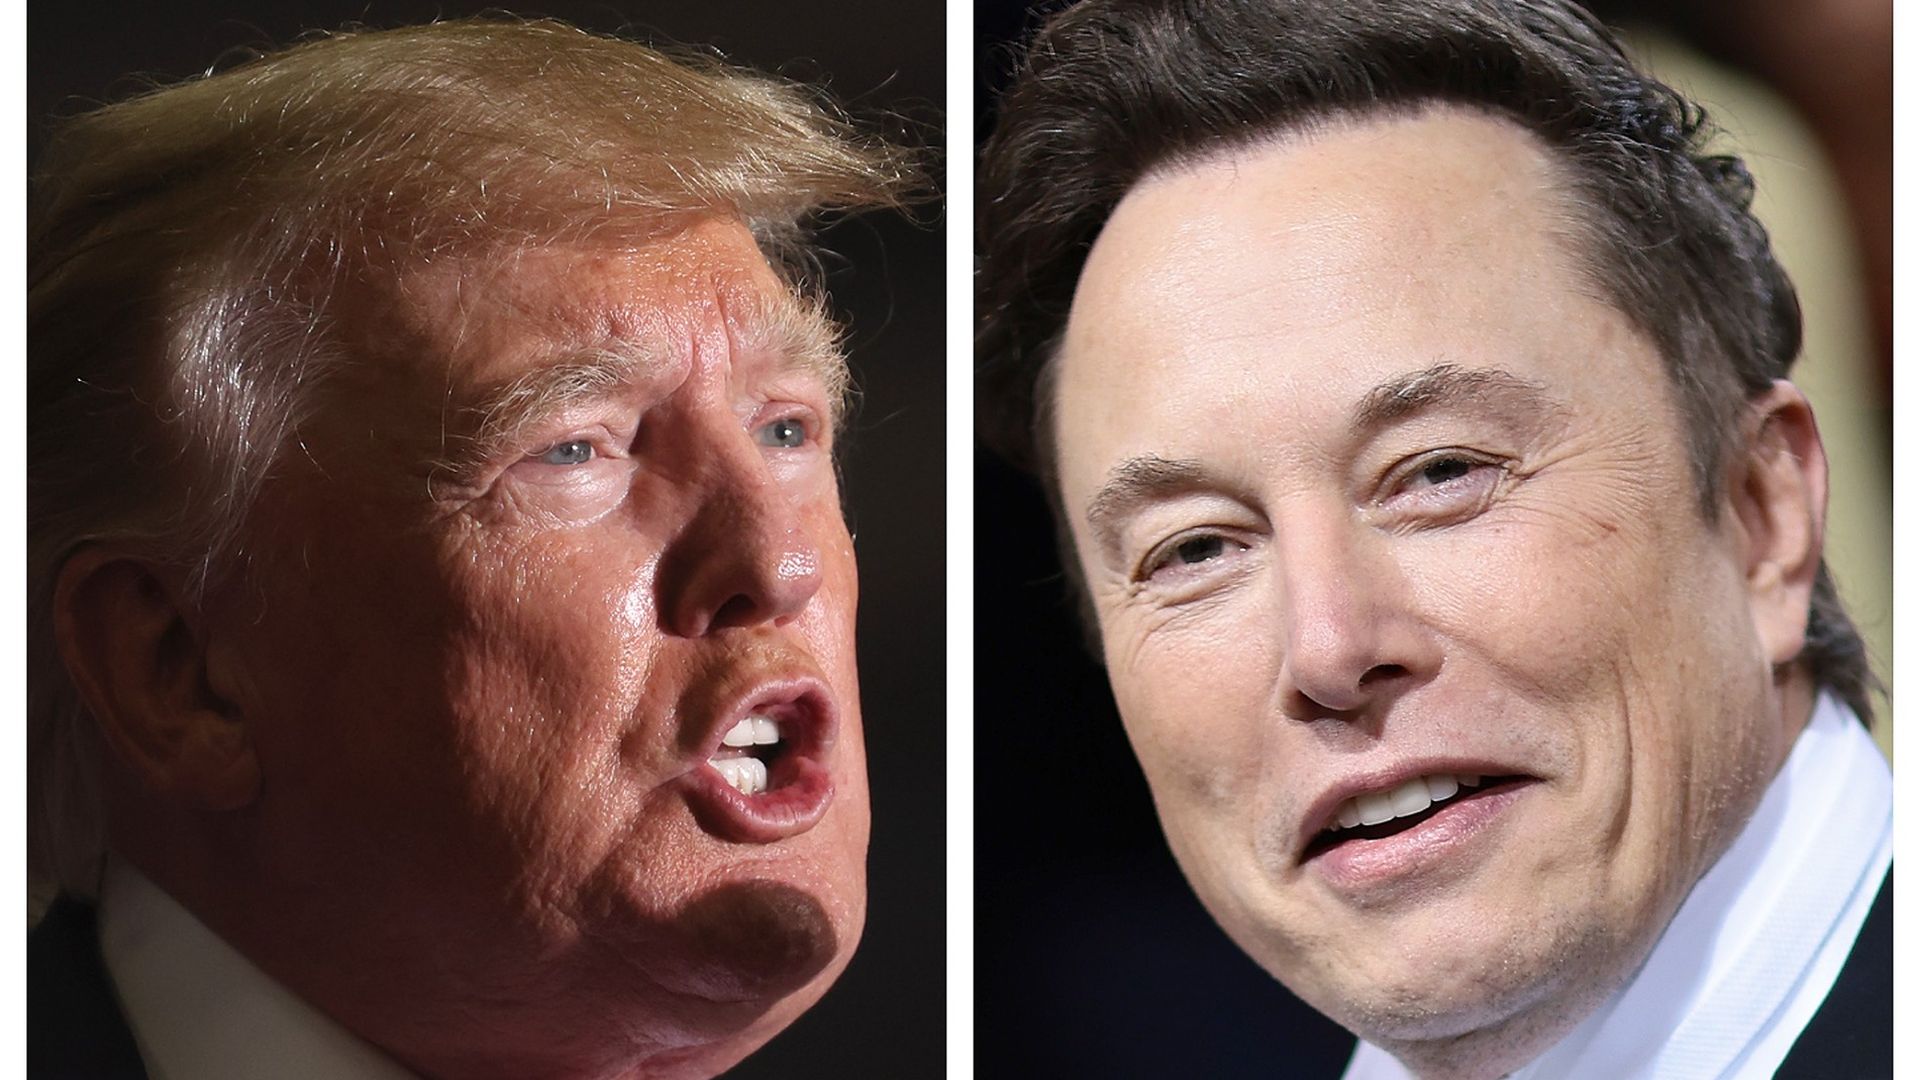 Combination images of former President Trump and Elon Musk.